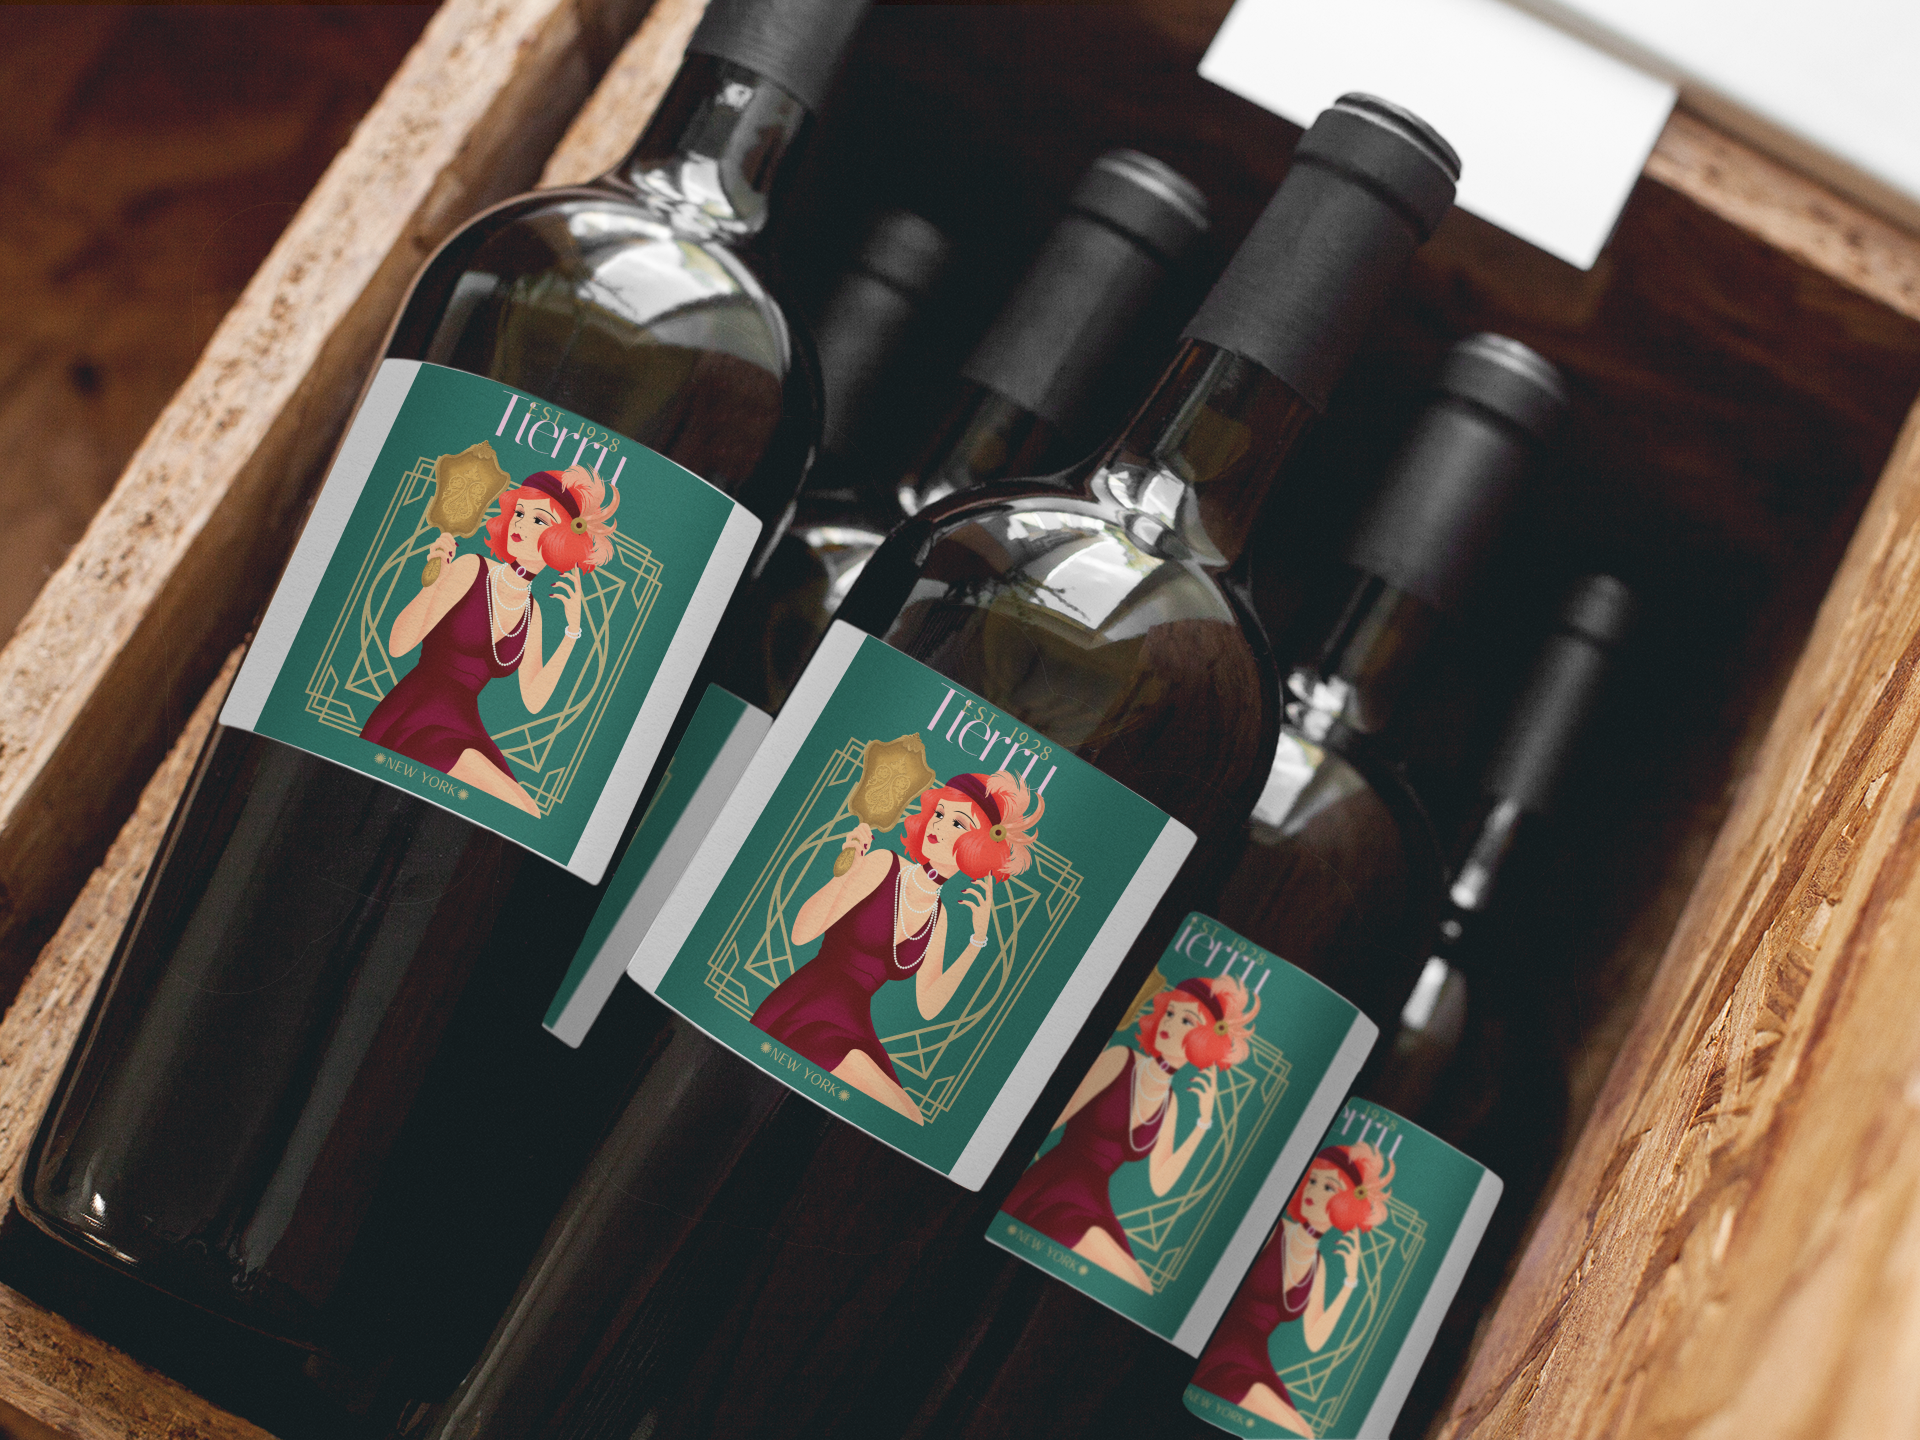 label-mockup-of-a-set-of-wine-bottles-stacked-in-a-wooden-container-a6687.png